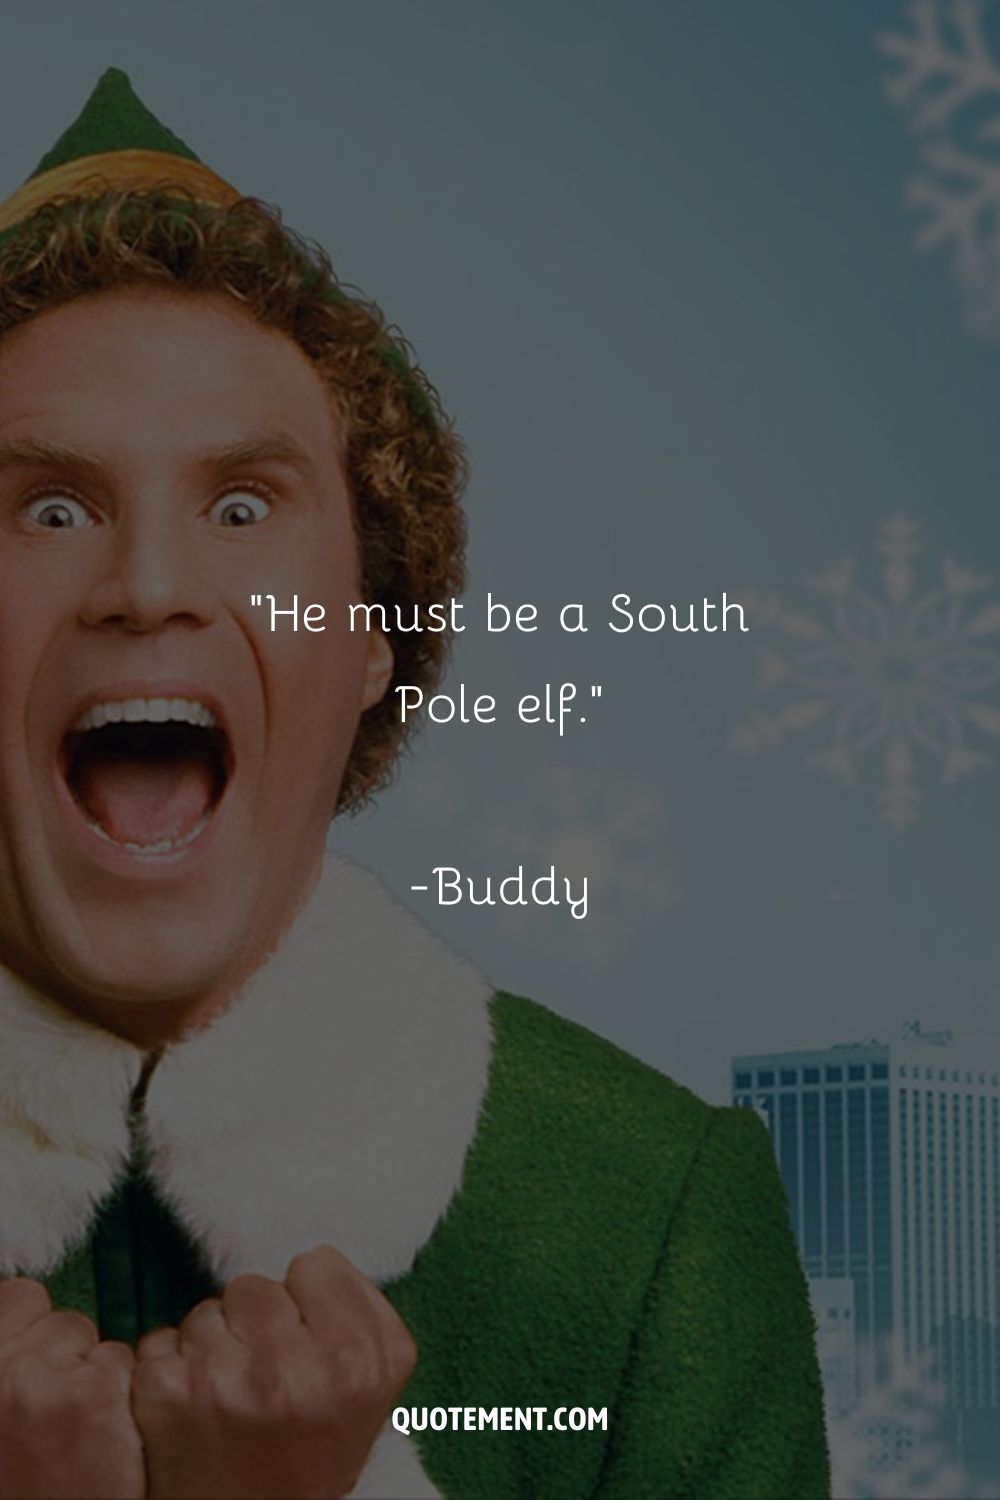 In the holiday spirit, Buddy shares cheerful vibes.